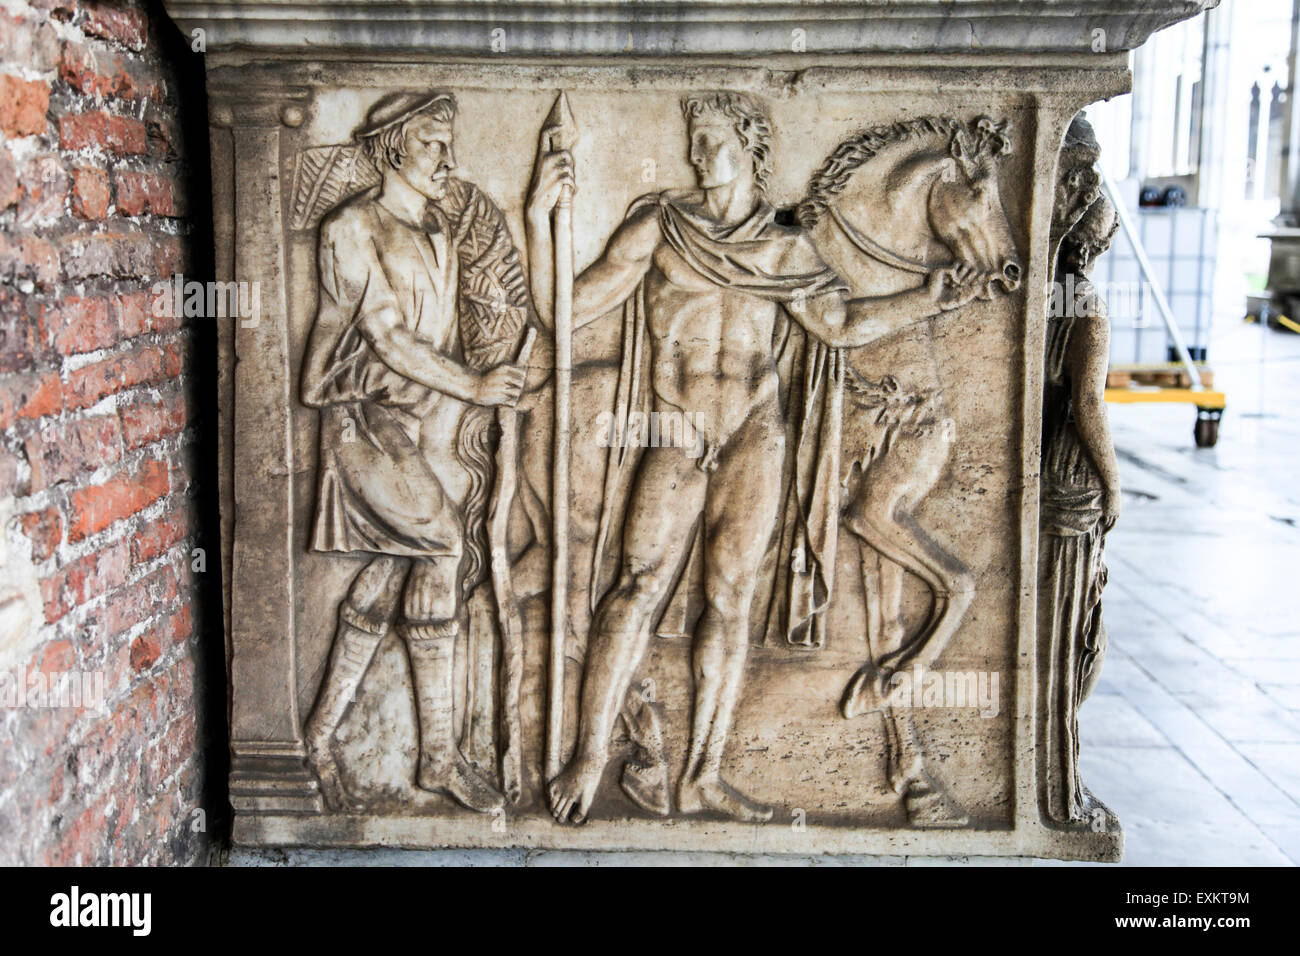 Roman period carved stone relief sarcophagus panel inside the Camposanto Monumentale cemetery. Pisa, Tuscany, Italy. Stock Photo